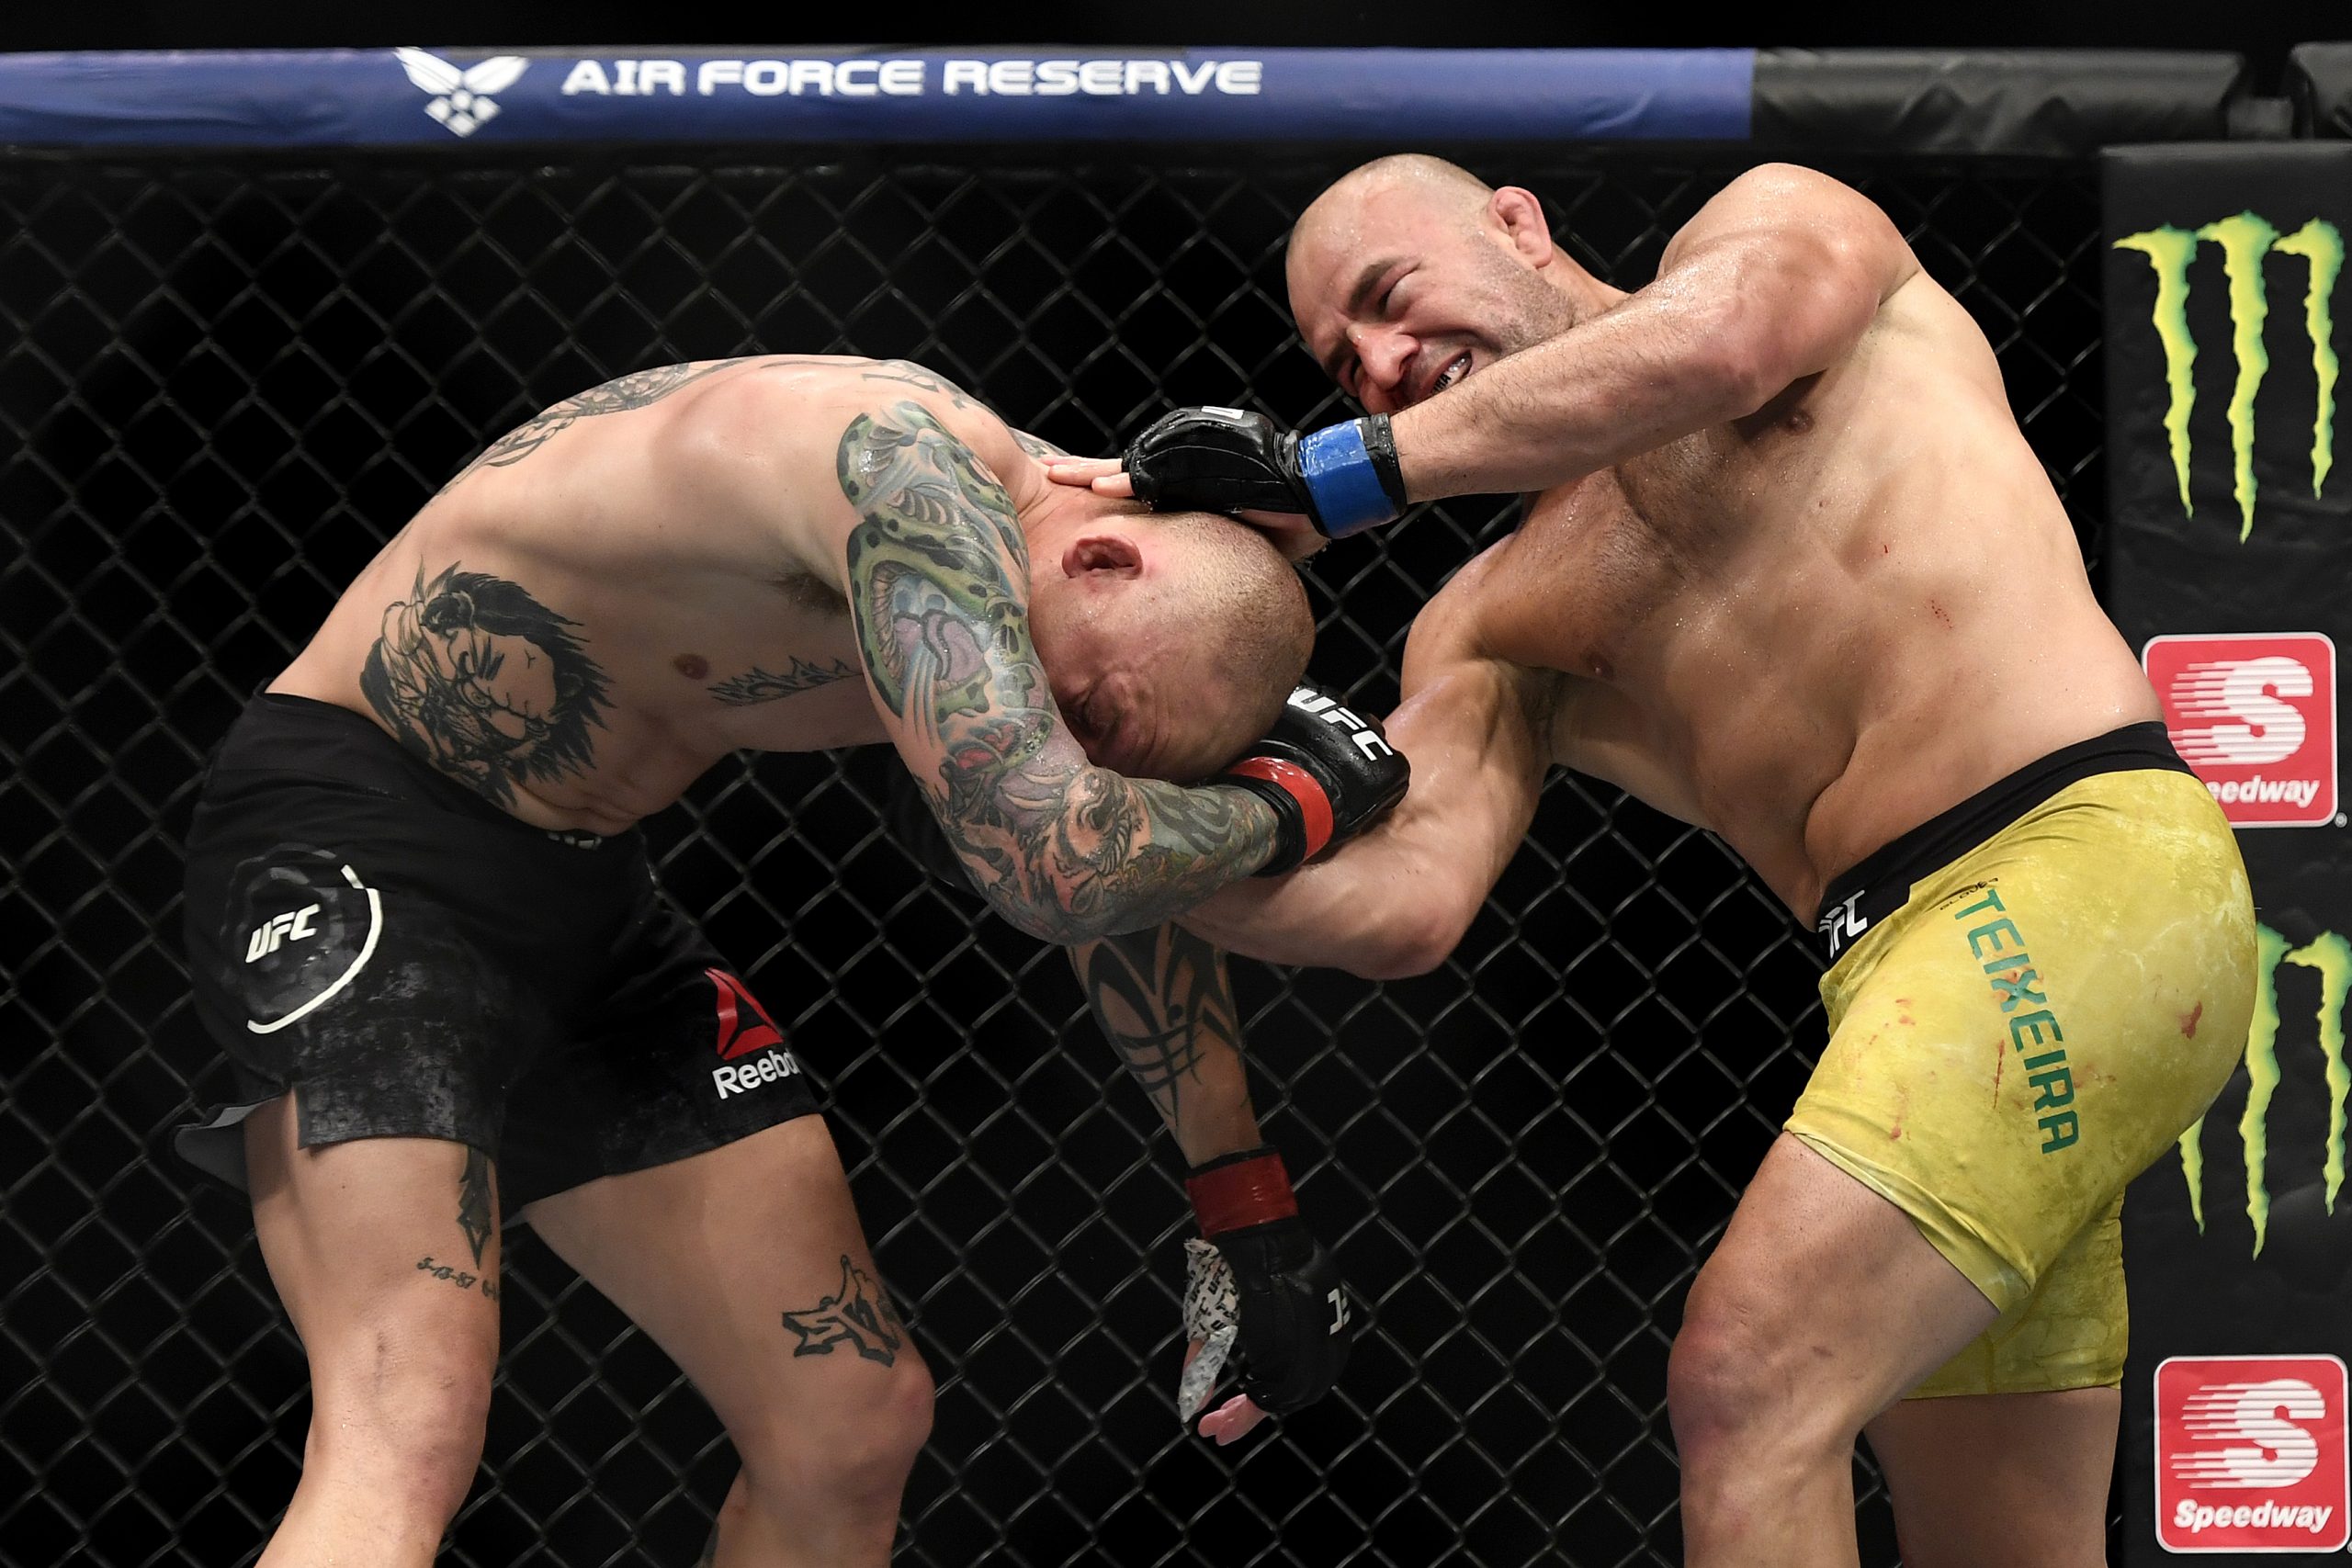 Anthony Smith's teeth were falling out against Glover Teixeira